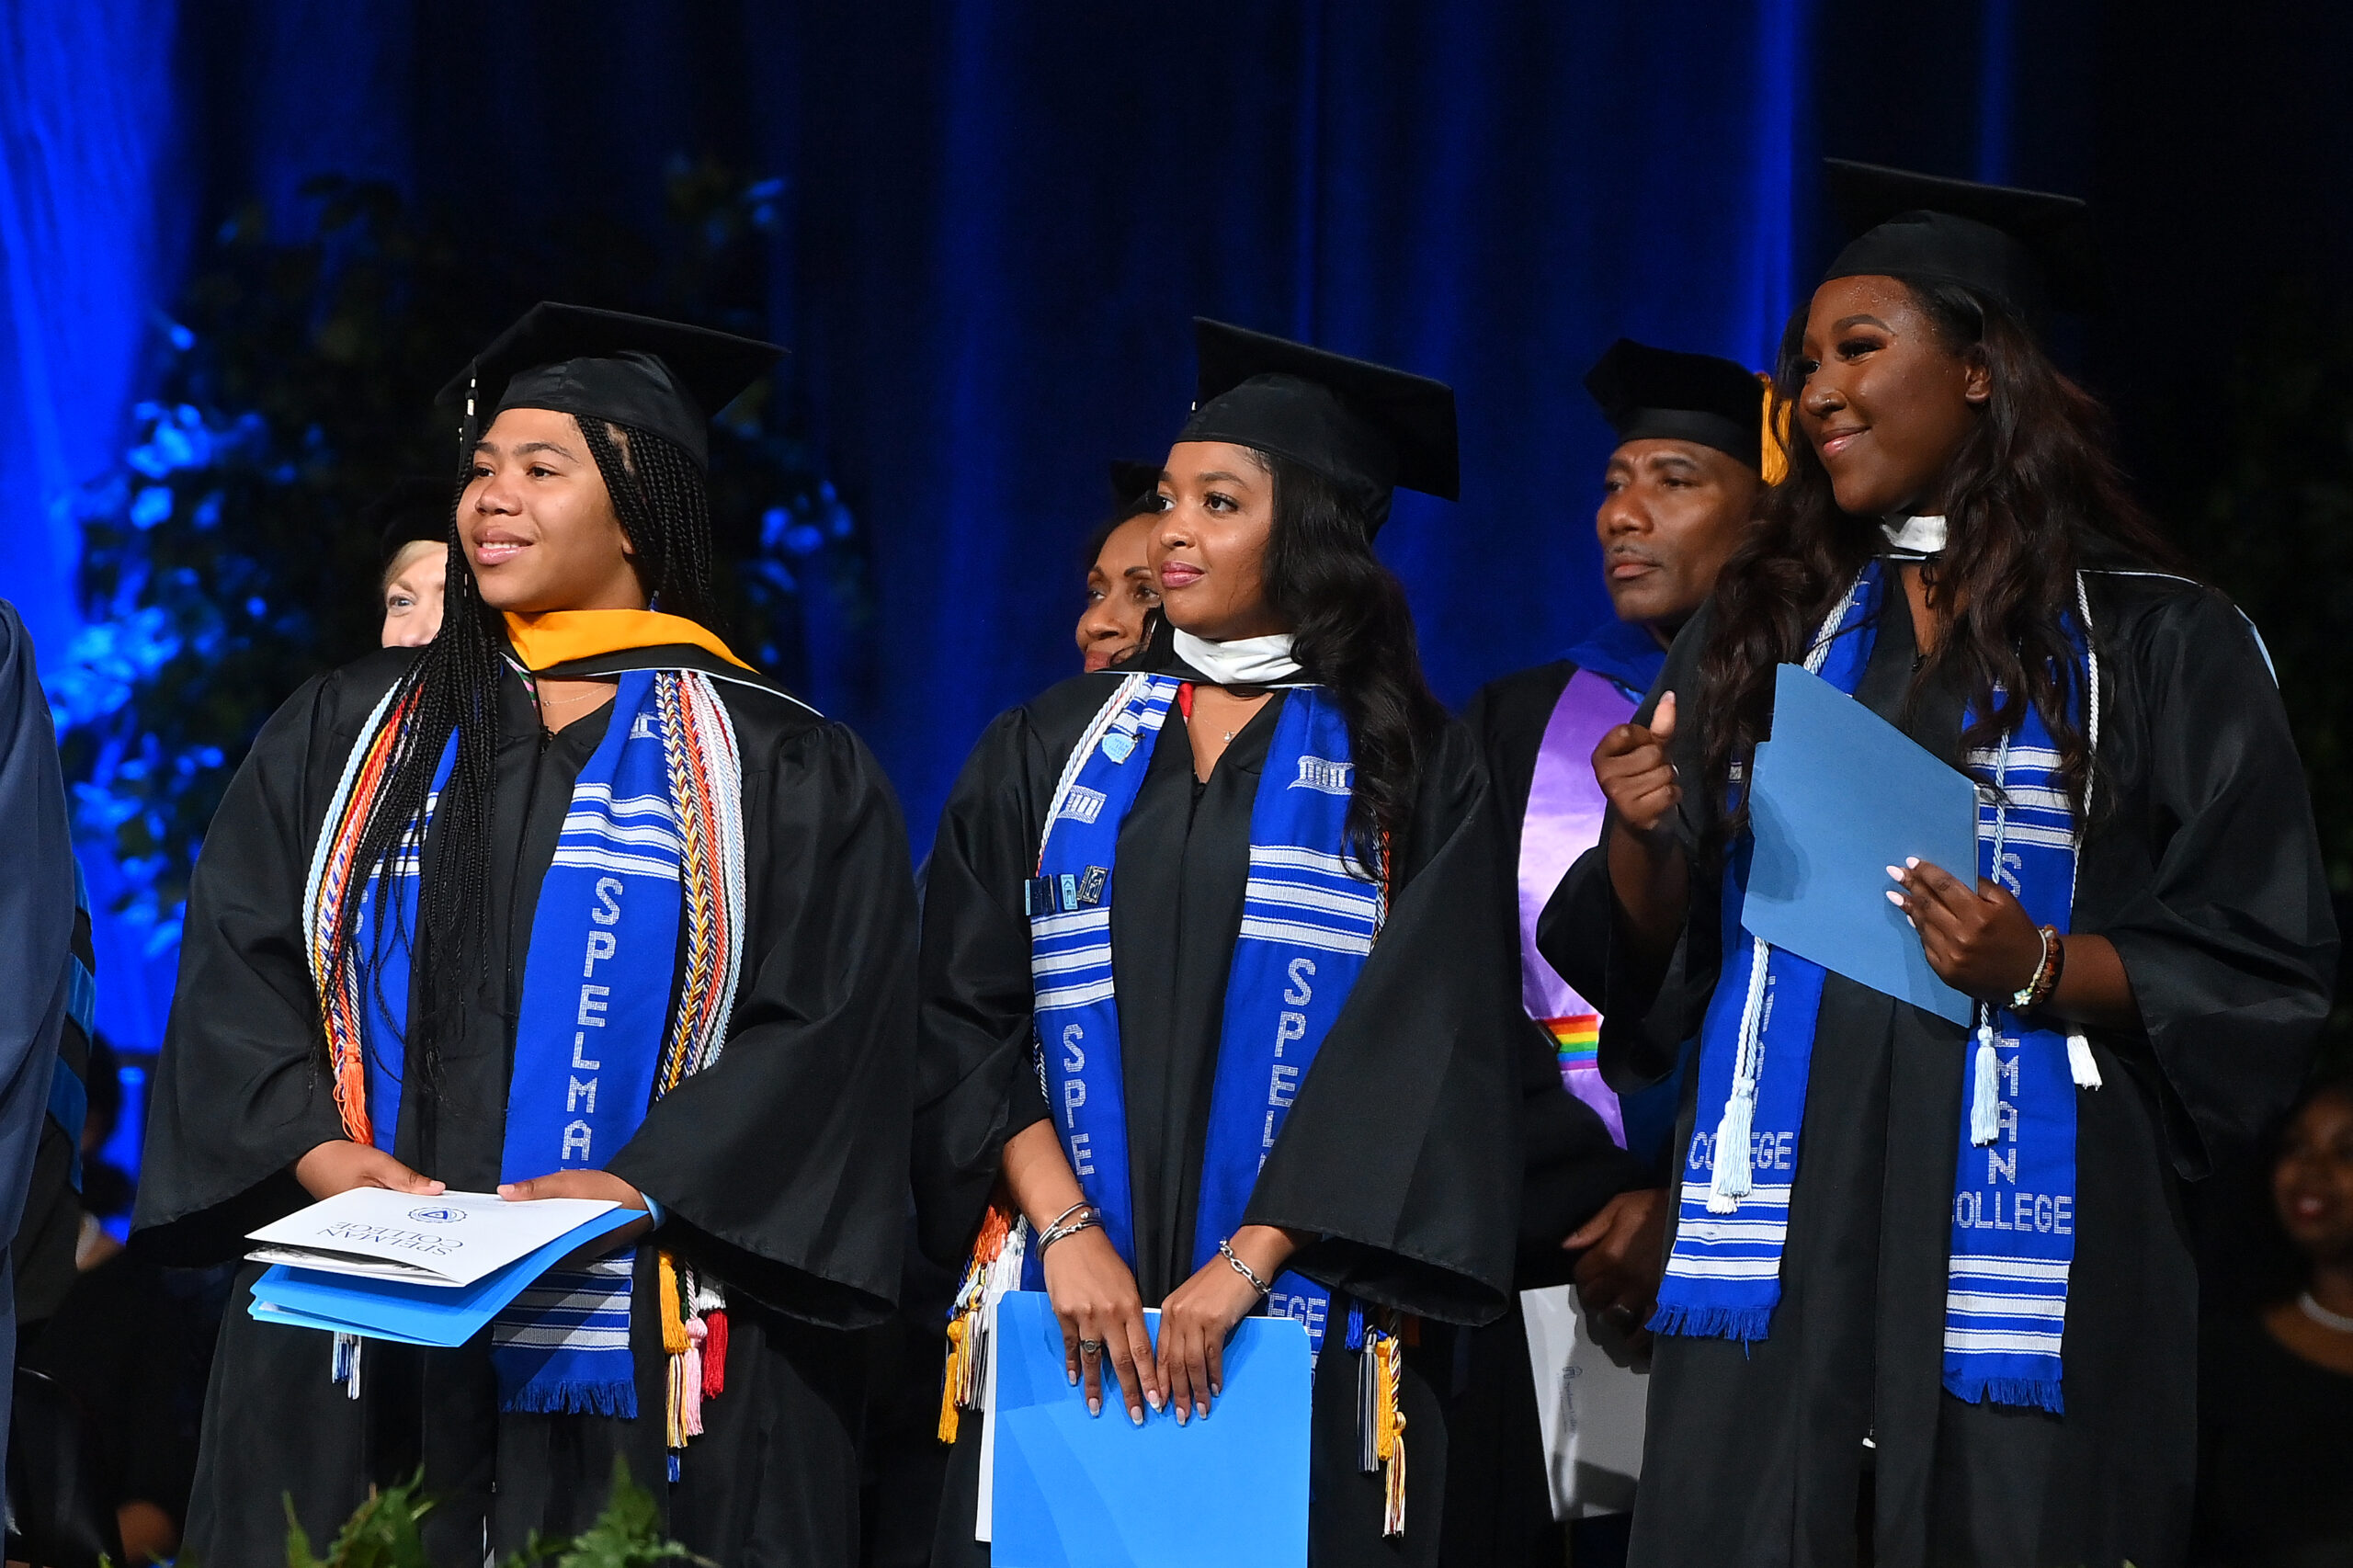 These Spelman College Students Made History At Graduation